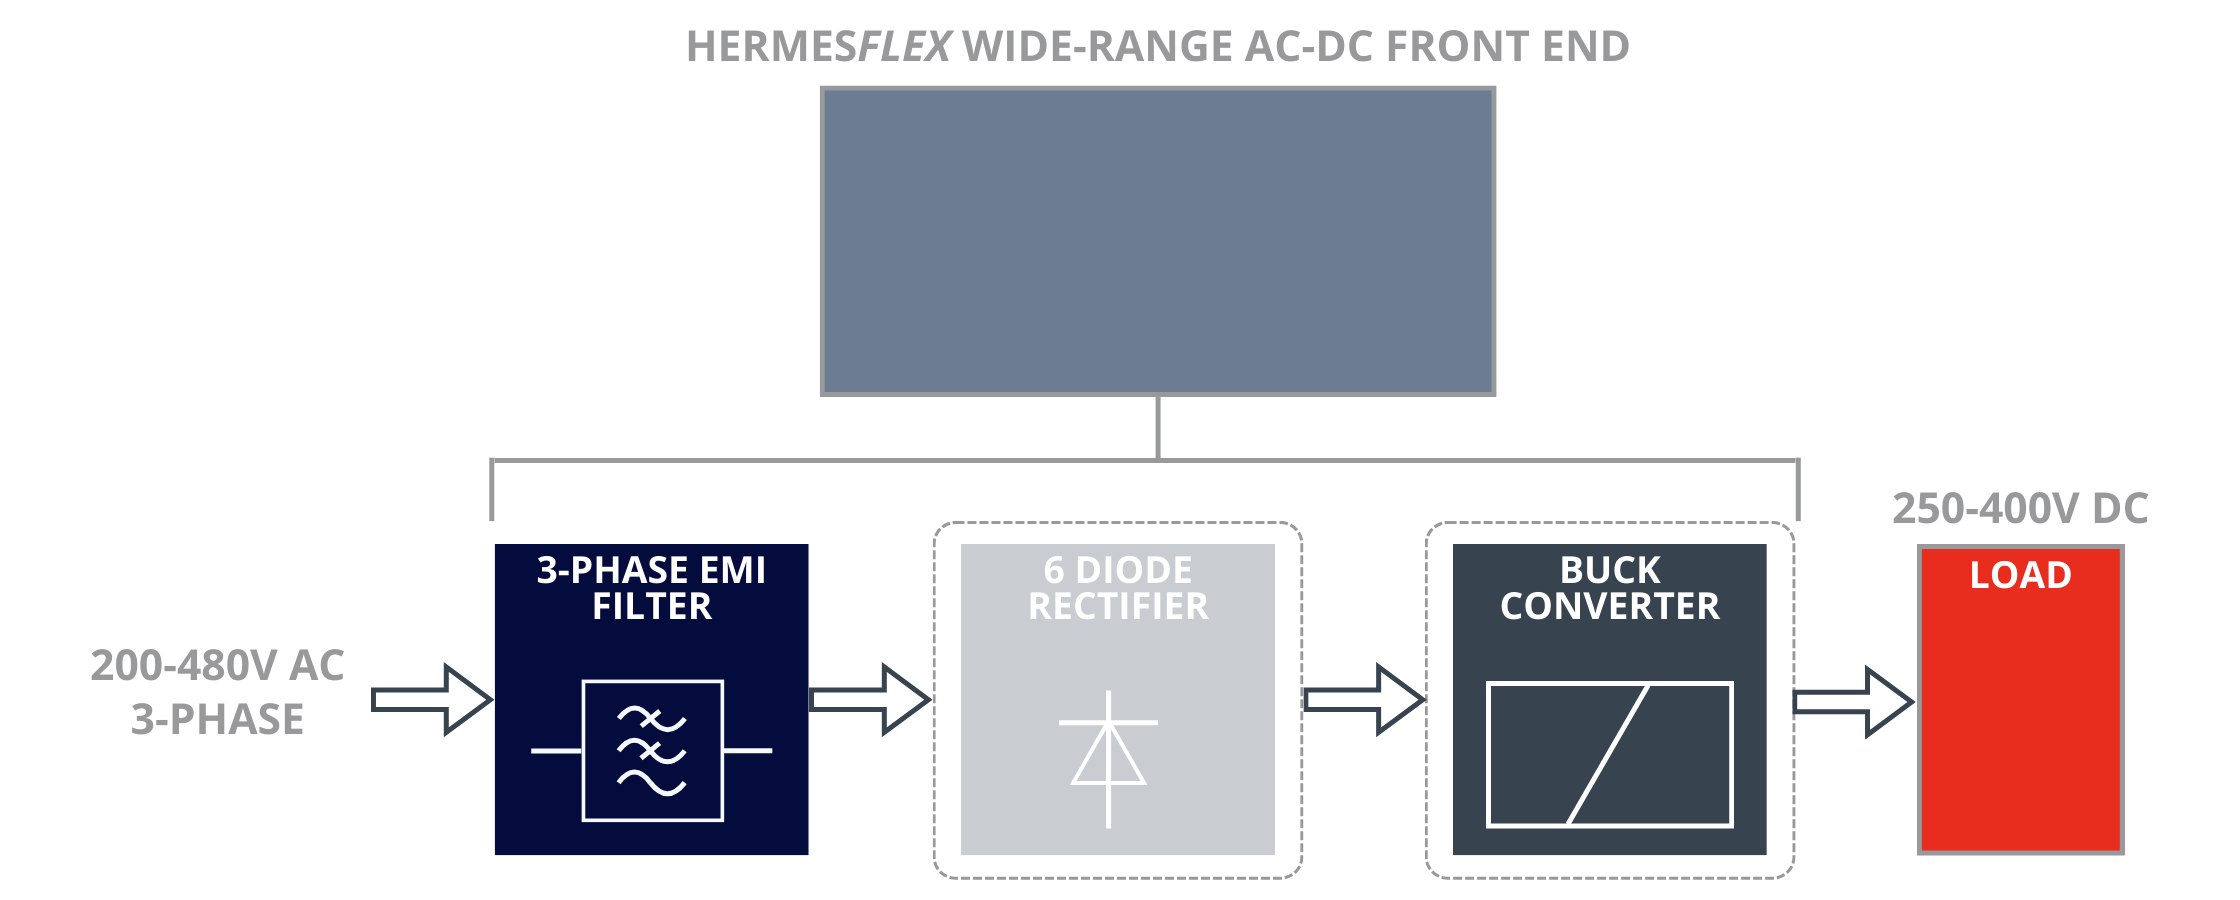 HermesFlex packaged AC-DC front end